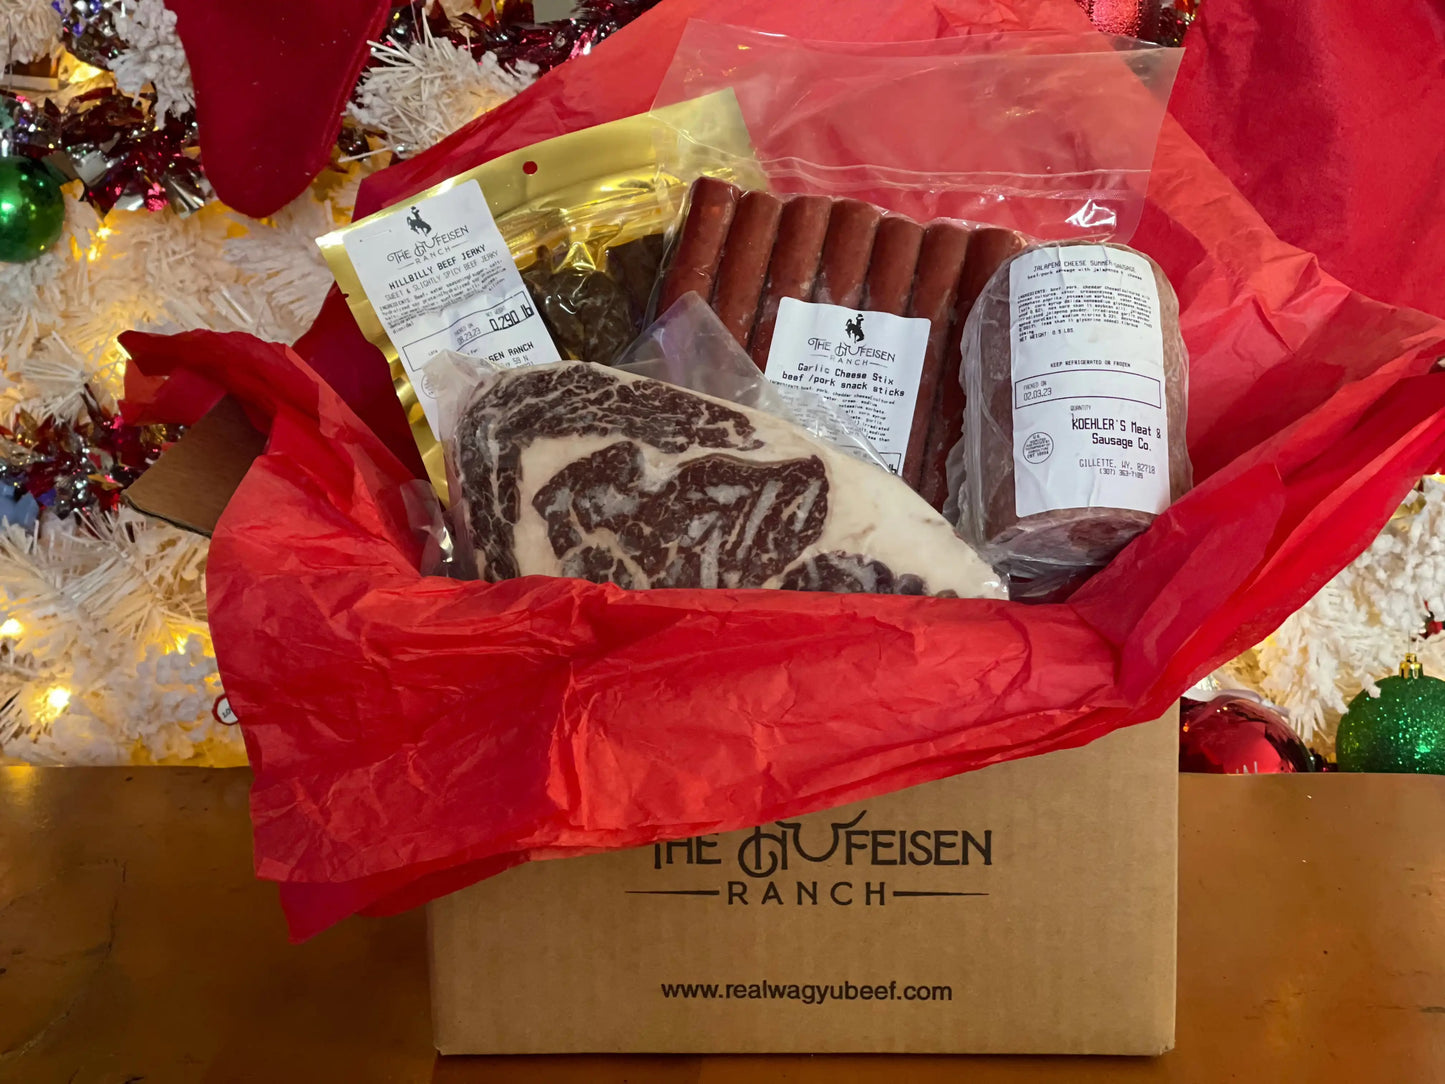 Wagyu Ribeye Gift BundleIntroducing our Wagyu Ribeye Gift Bundle— An amazing Ribeye Steak from the most prized beef in the world, a delectable 8-pack of snack sticks, a tantalizing pack of Wagyu Ribeye Gift BundleThe Hufeisen-Ranch (WYO Wagyu)